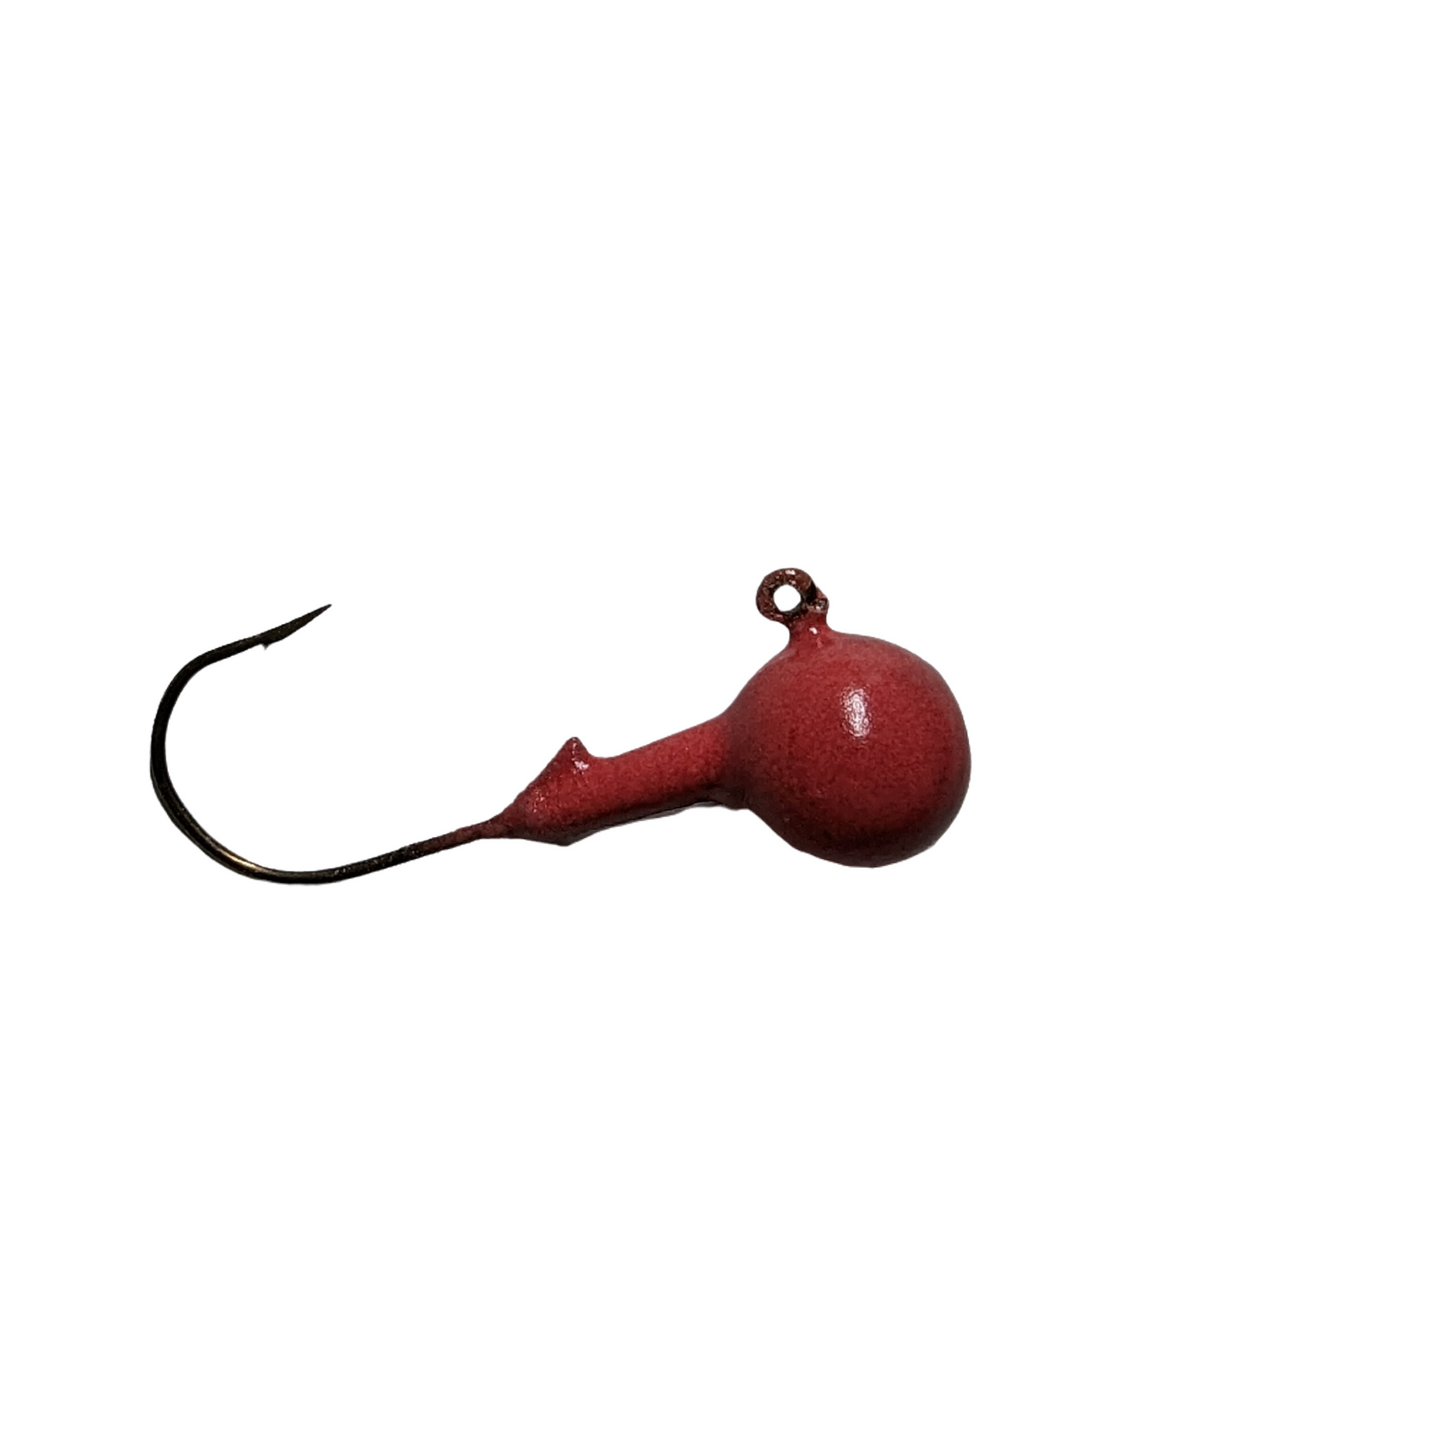 Round ball jig with bait keeper glow in the dark red 